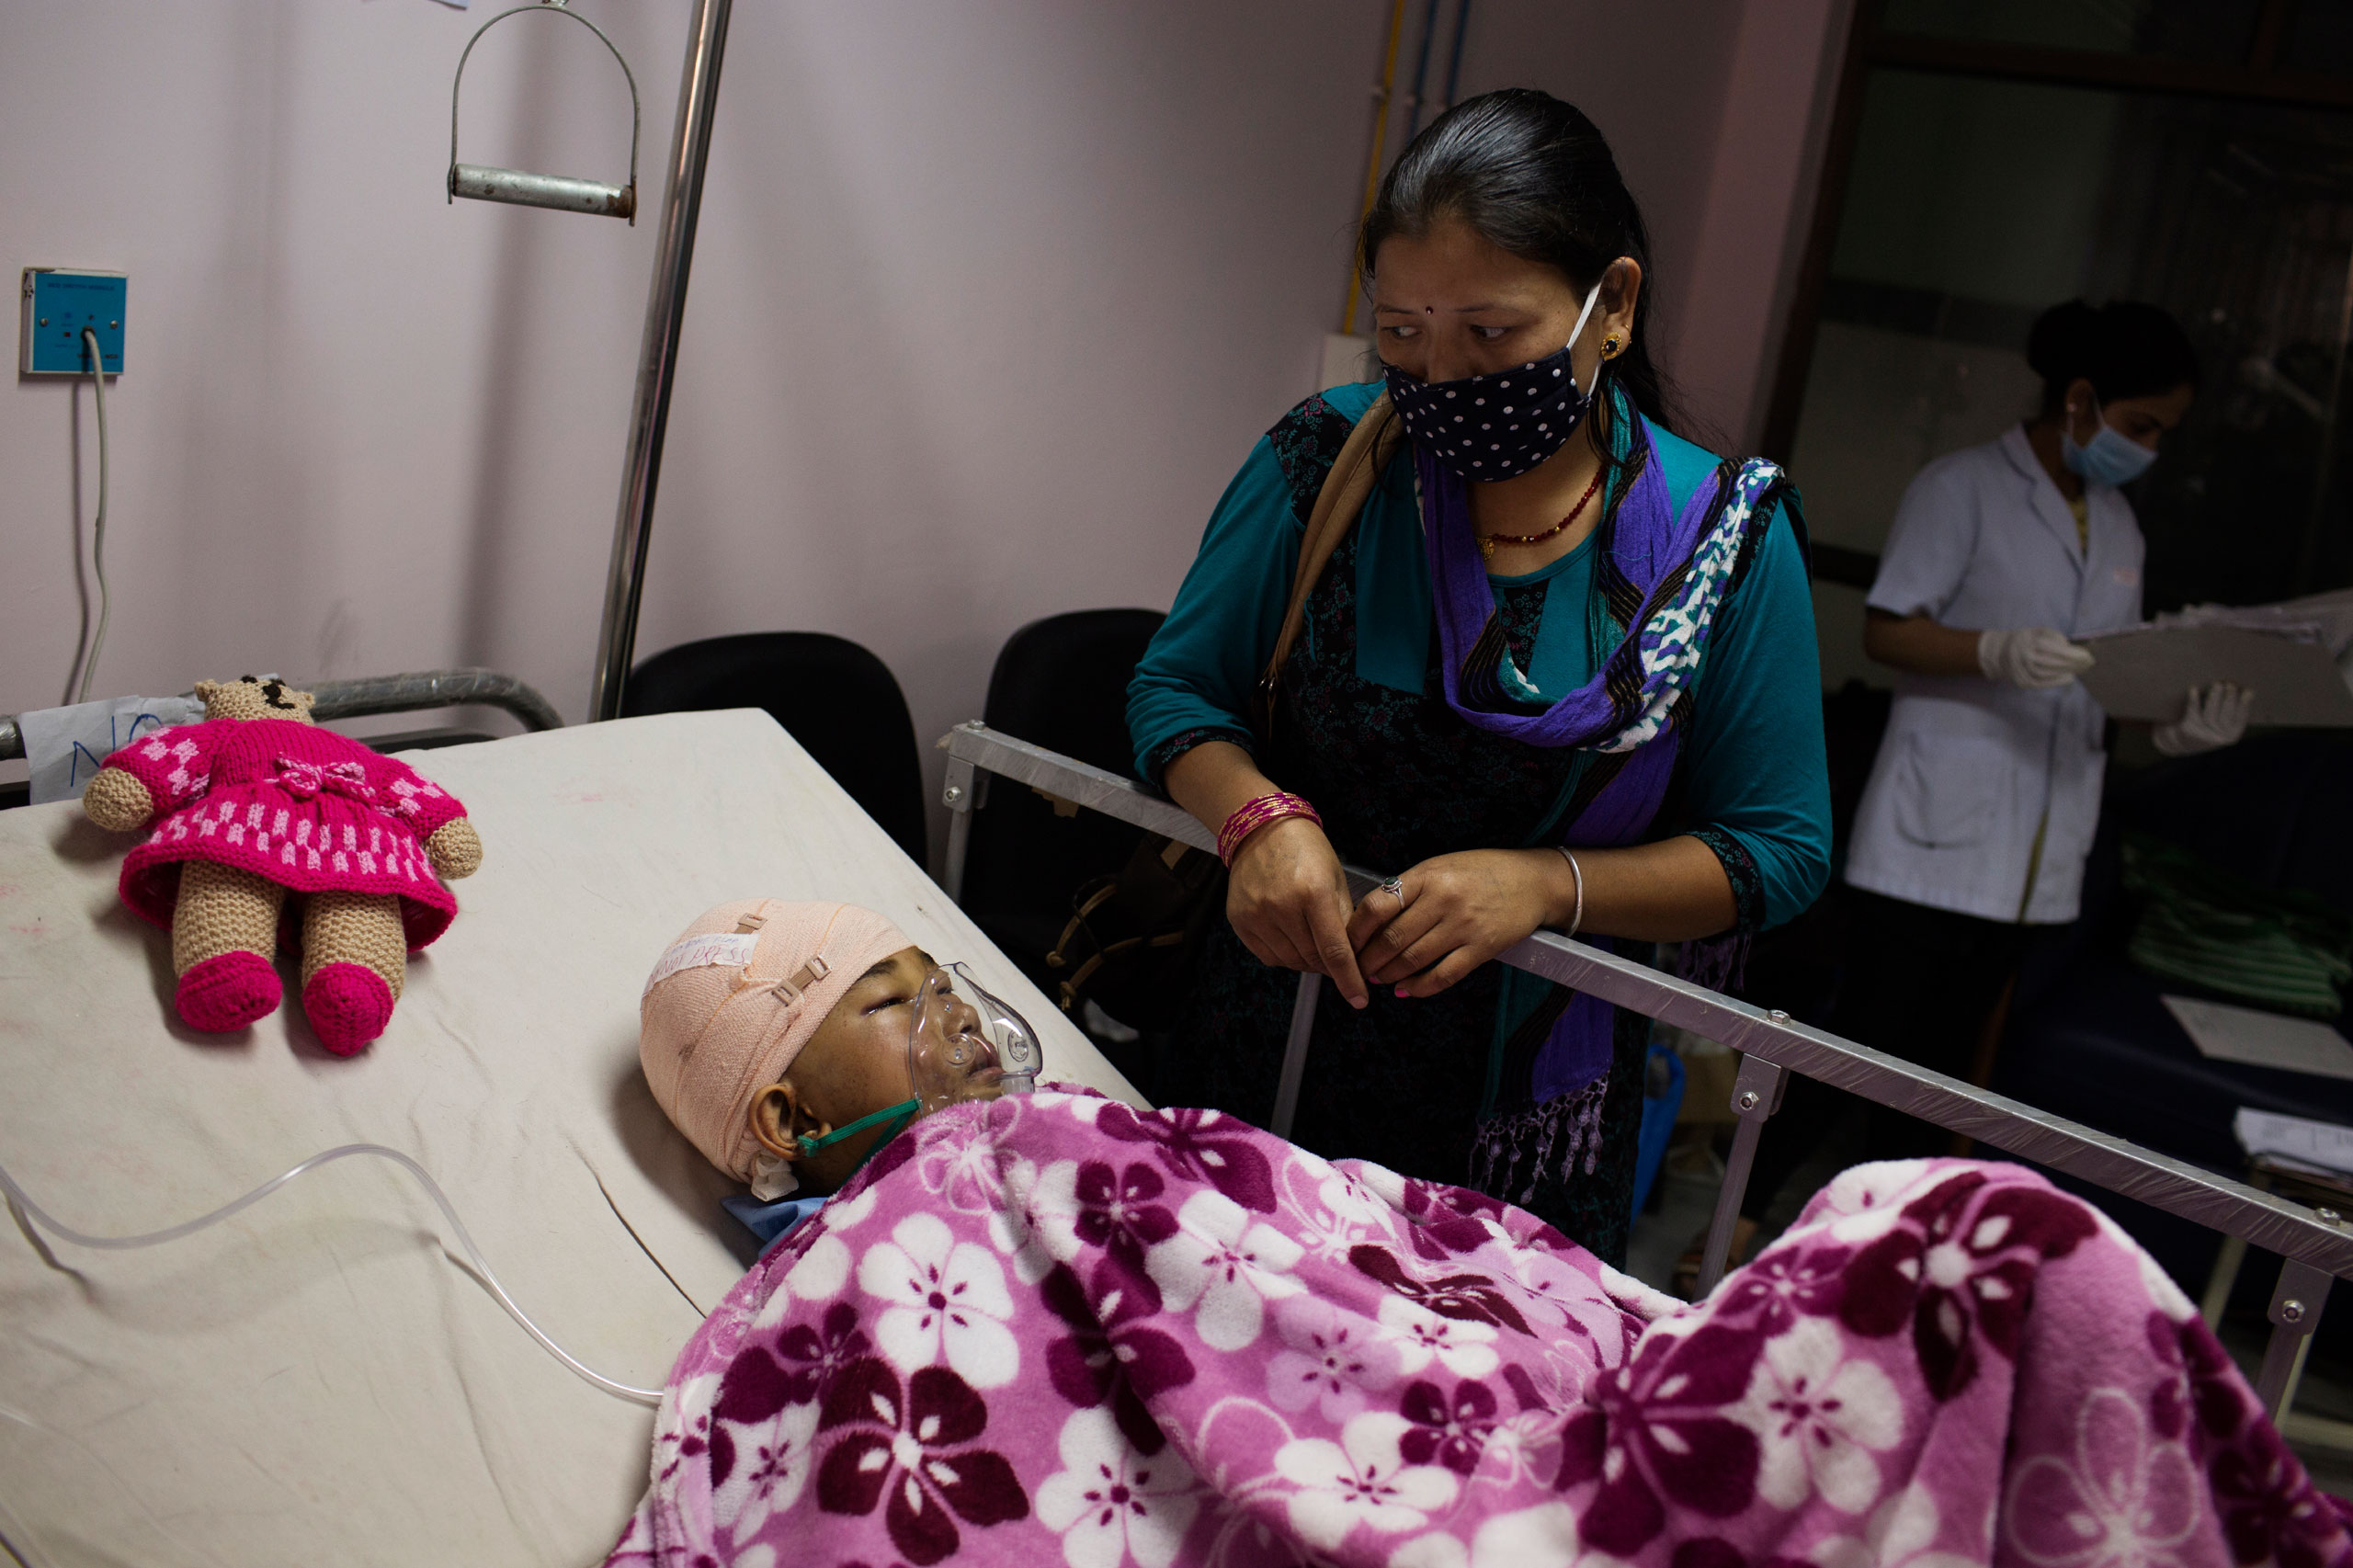 A mother looks at her son who was injured in the earthquake, at the Nepal and India Trauma Center in Kathmandu, April 29, 2015.